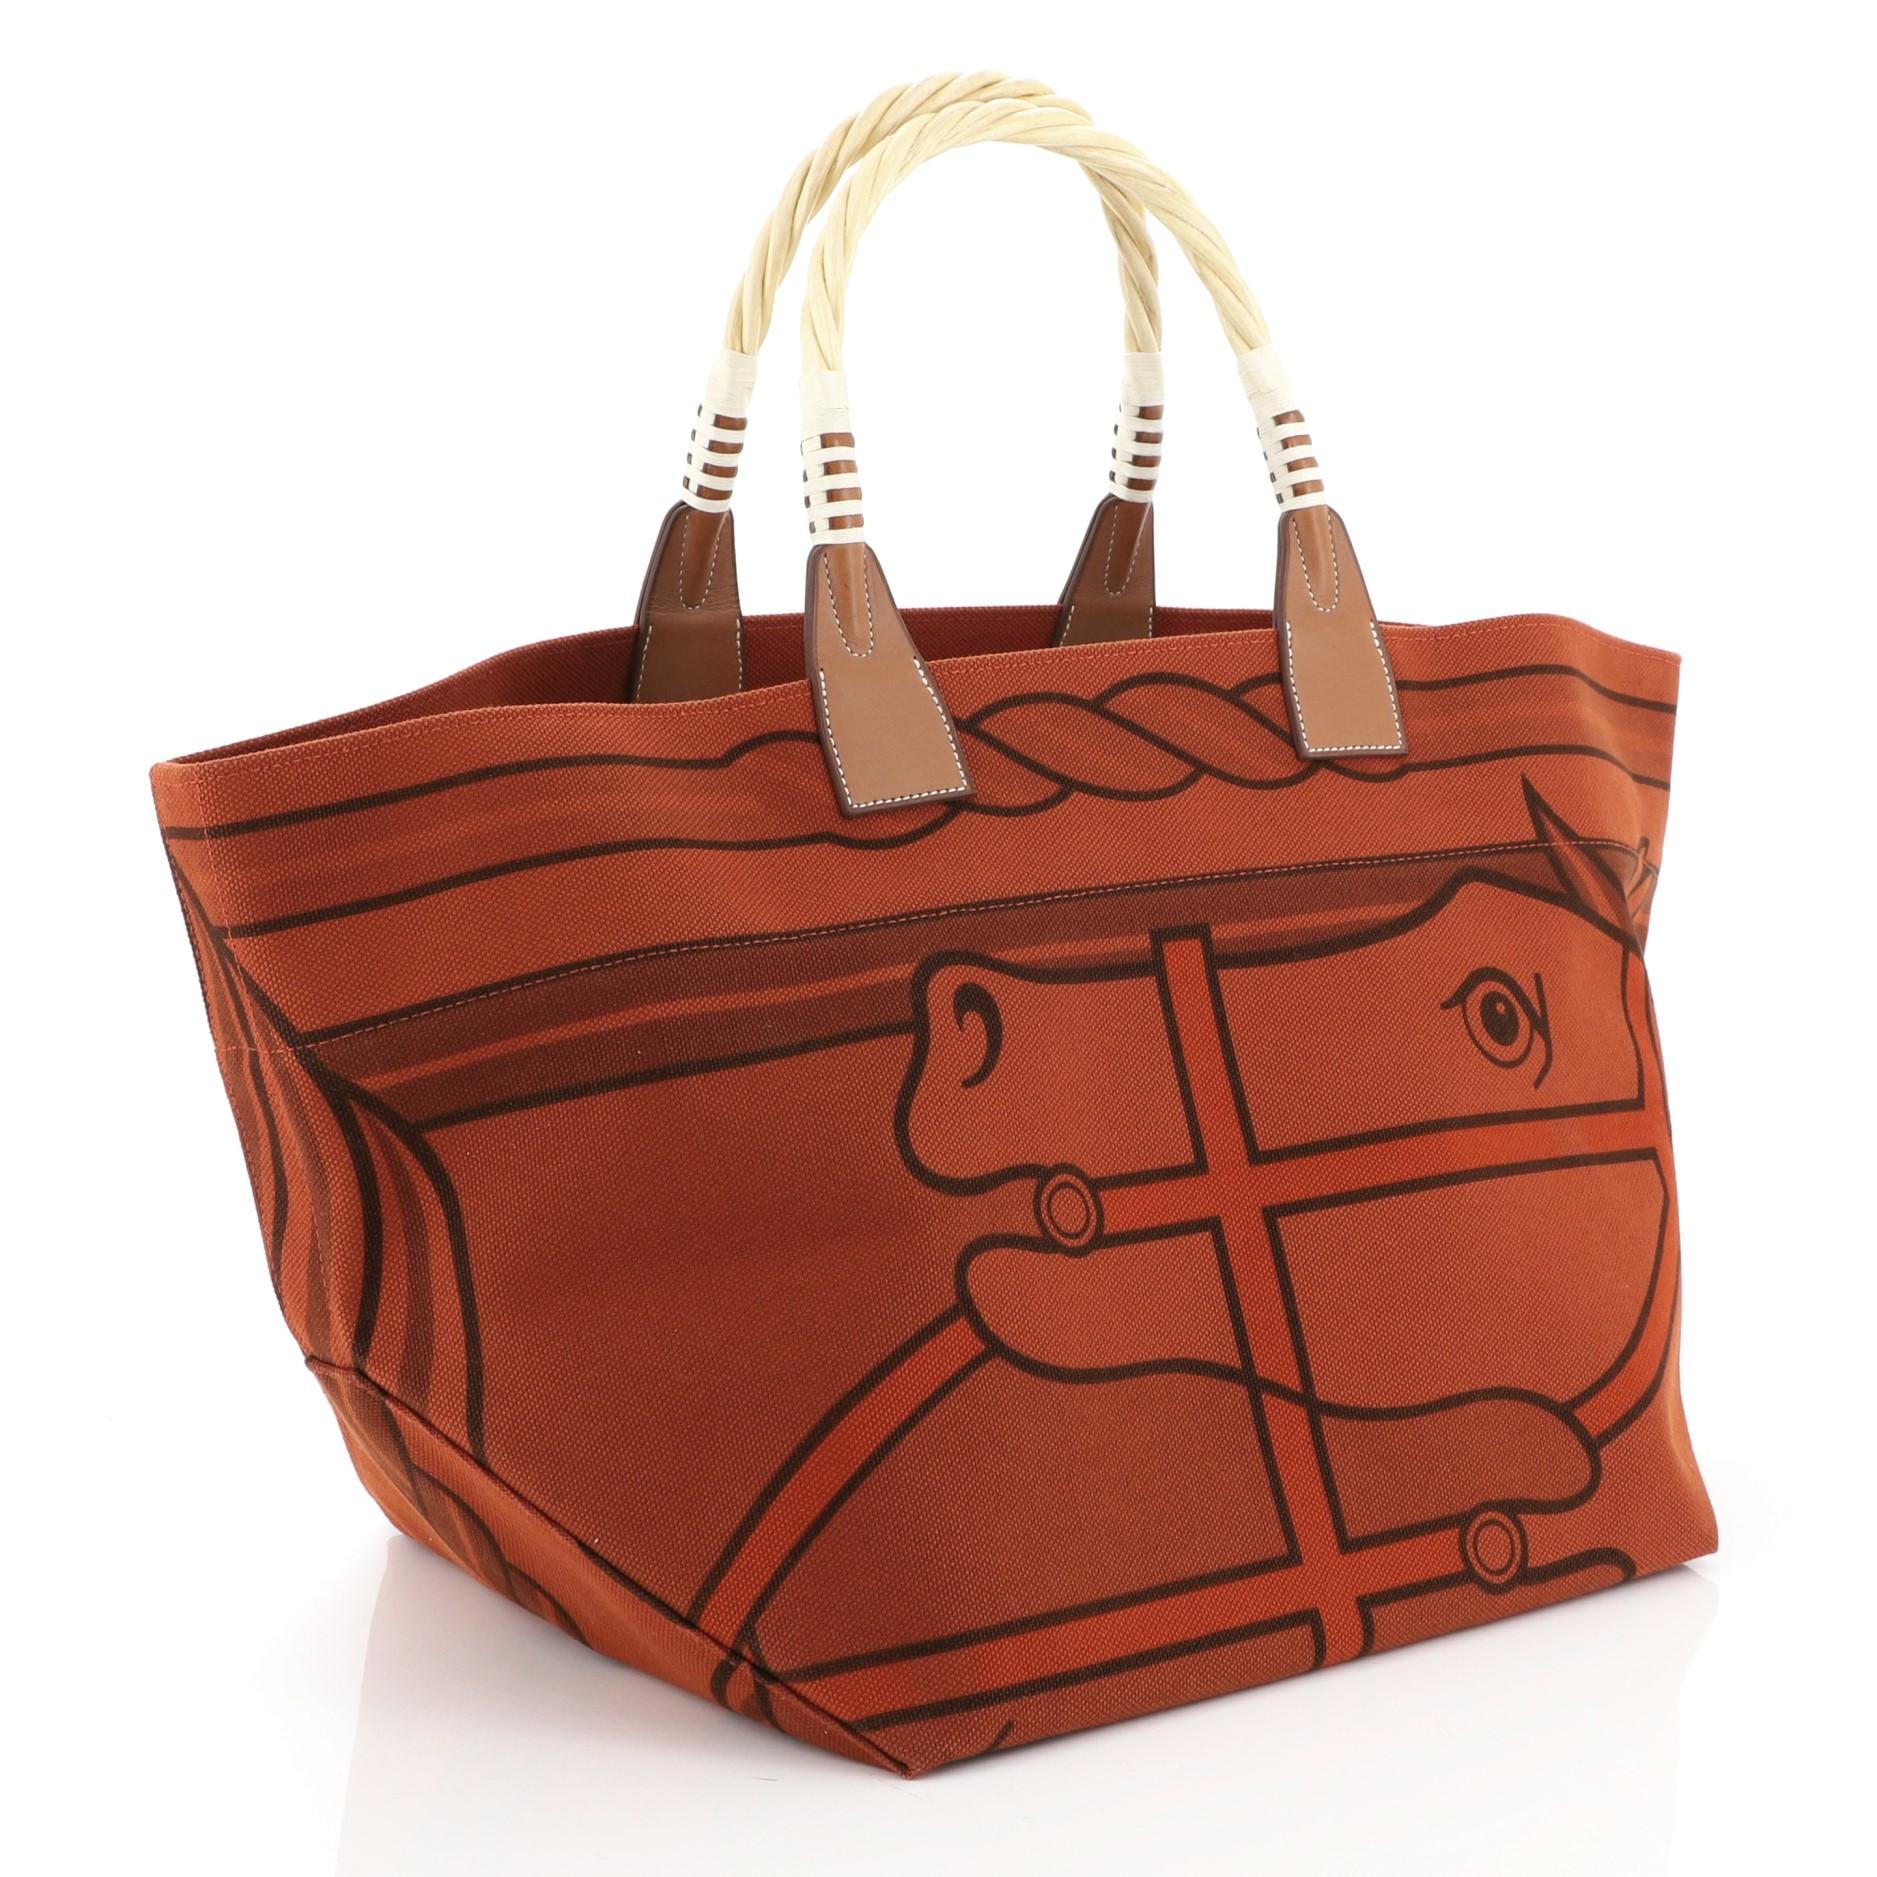 This Hermes Sac Steeple Tote Printed Toile with Wood, crafted from Brique Toile H and Fauve Barenia leather, features a graphic print design and dual wood top handles. It opens to a Brique Toile H interior. Date stamp reads: P Square (2012).